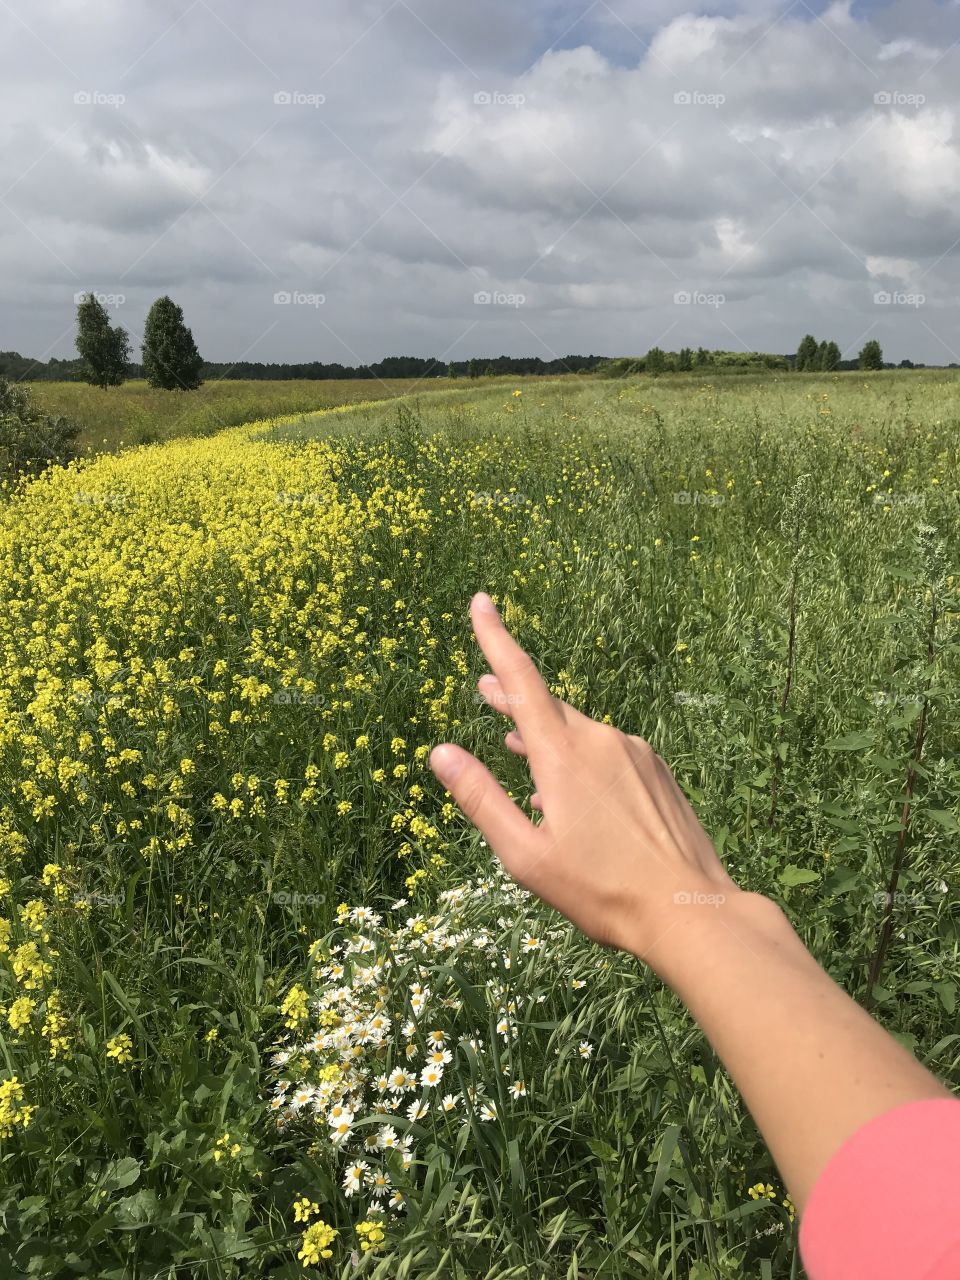 Russian field.  Wild flowers on a wild day.  Chamomile, hypericum. Gloomy sky and lawn with flowers. Hand pointing away. Hand showing the direction. 